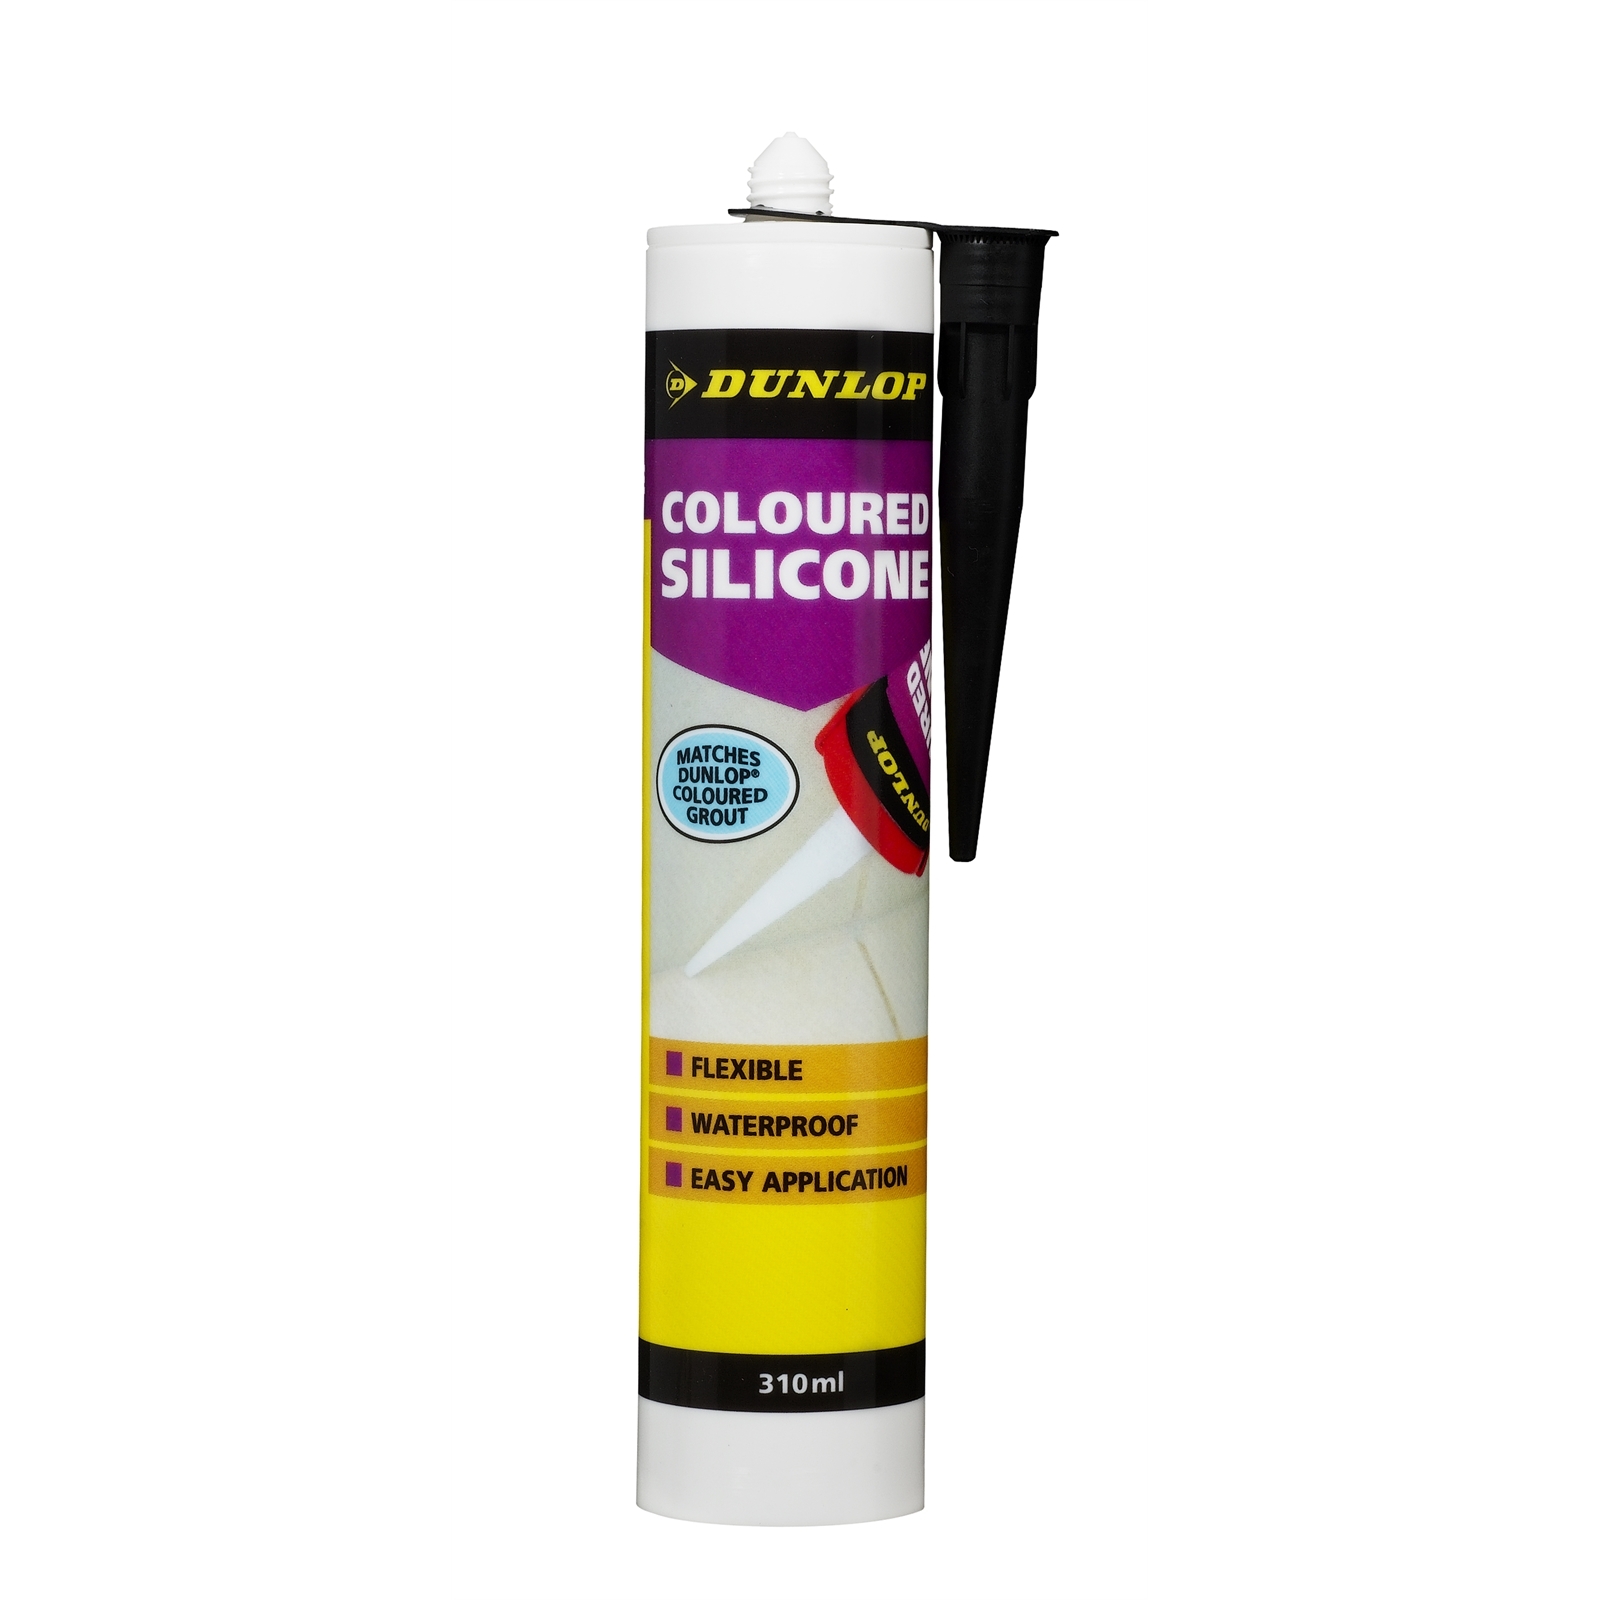 Dunlop 310ml Coloured Silicone - Slate Grey